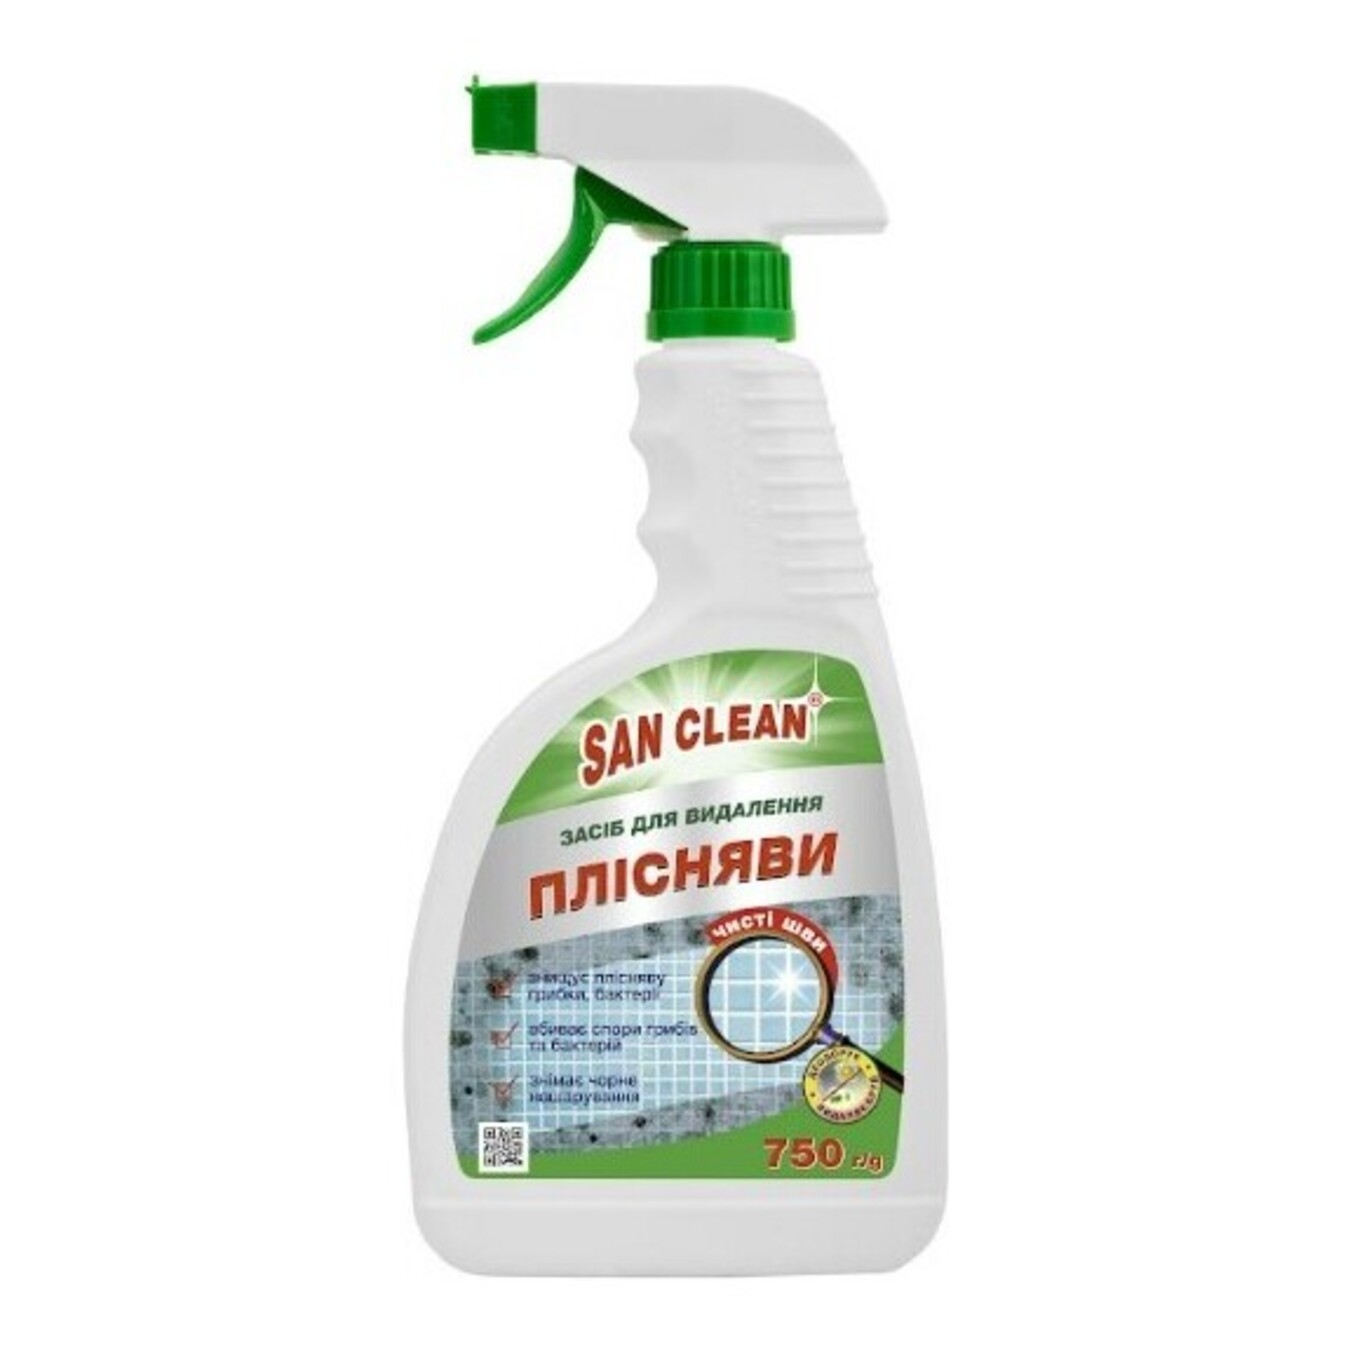 San Clean Tool for removing mold and dirt with a spray 750g